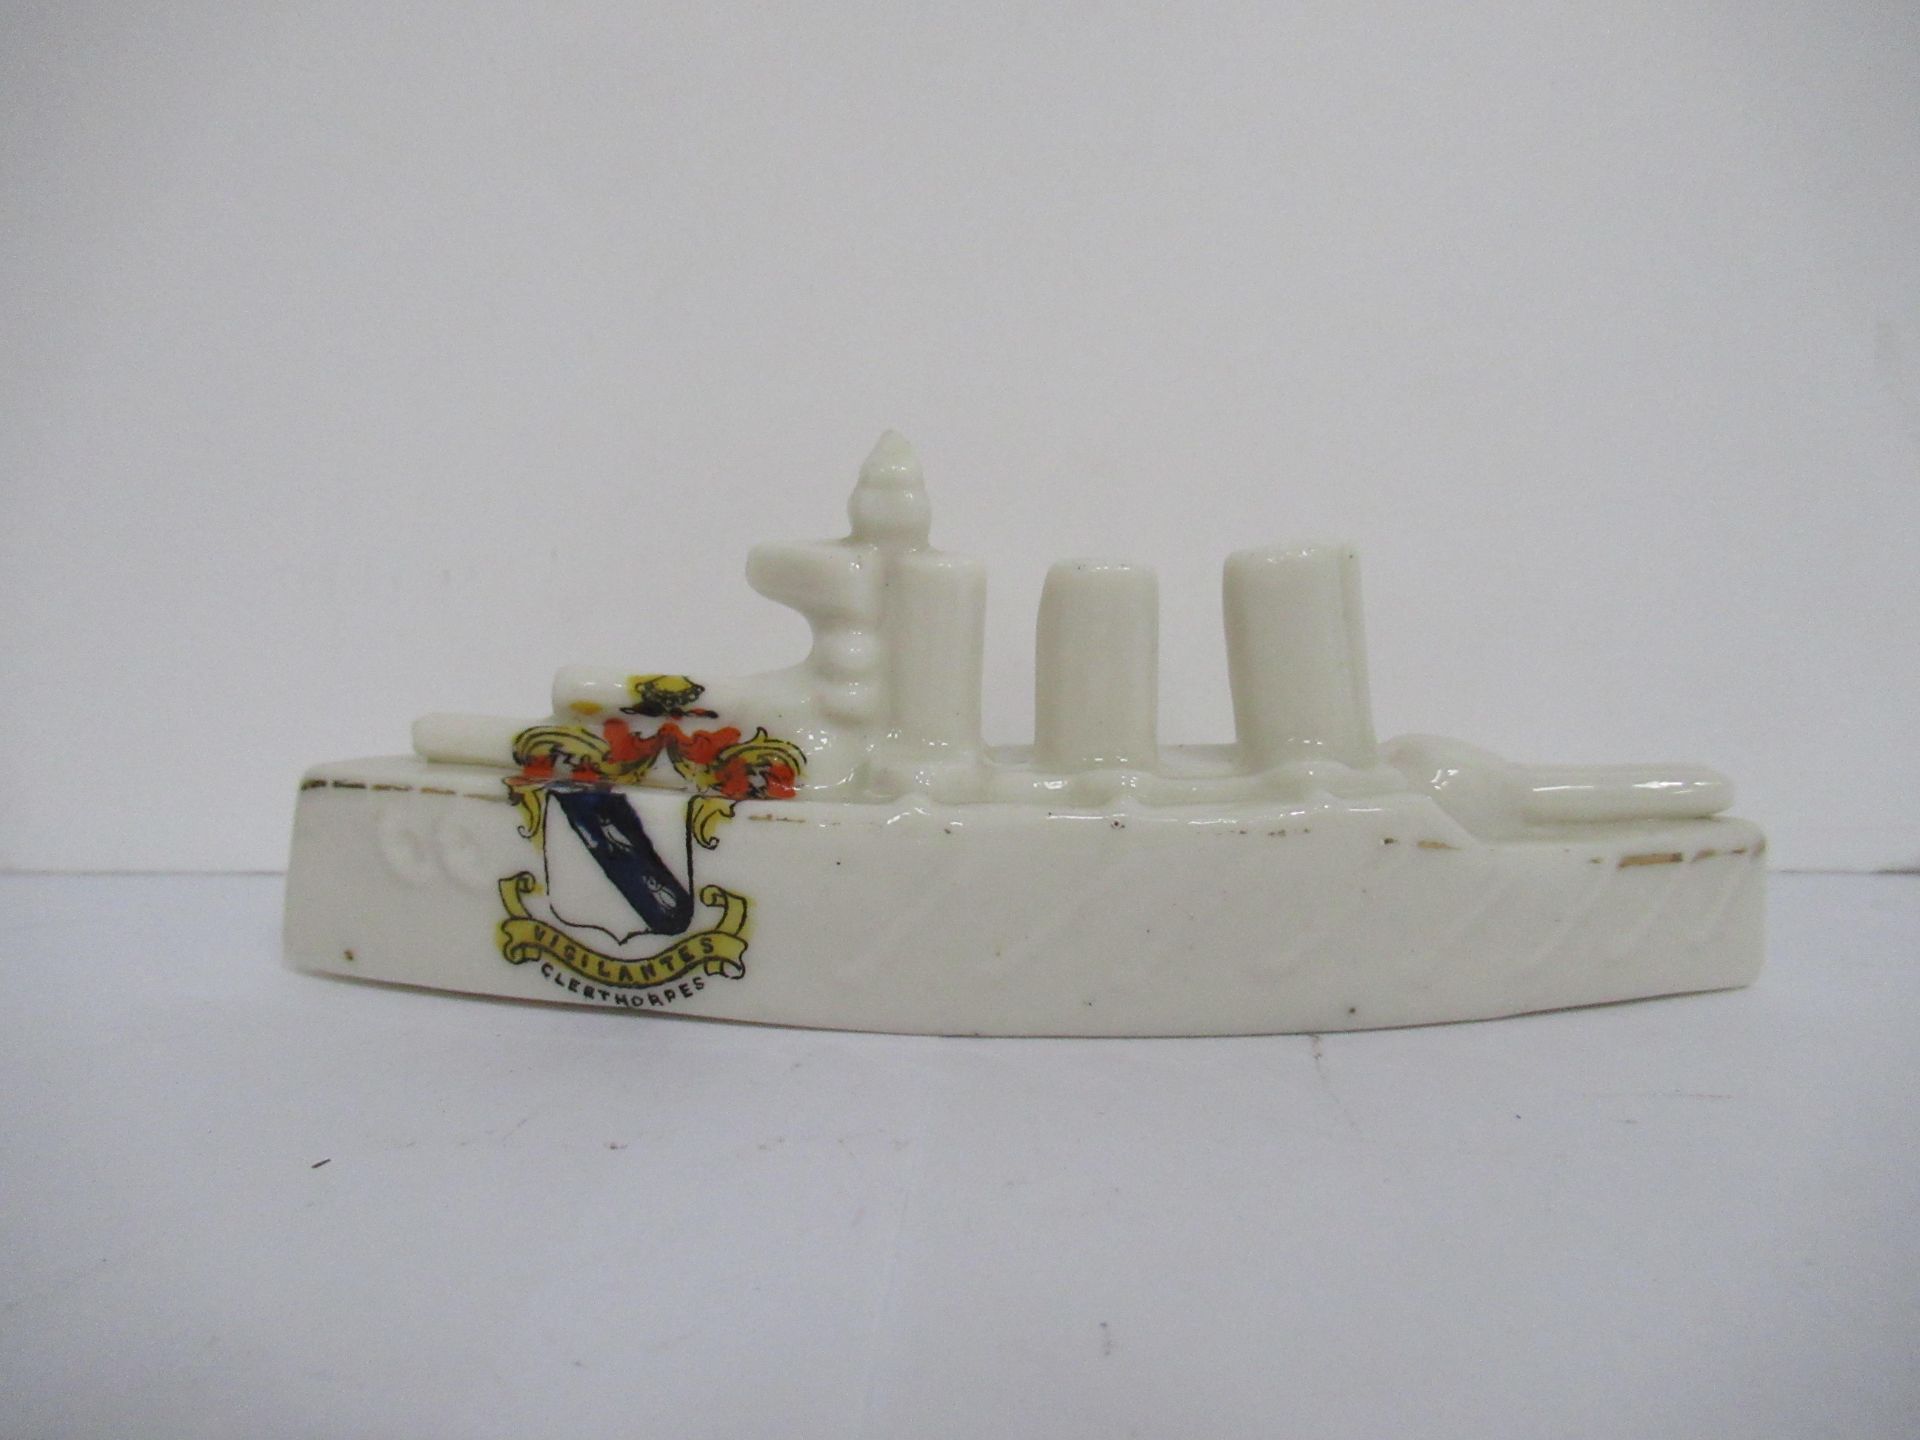 Crested China model of battleship with Cleethorpes coat of arms (120mm x 65mm)